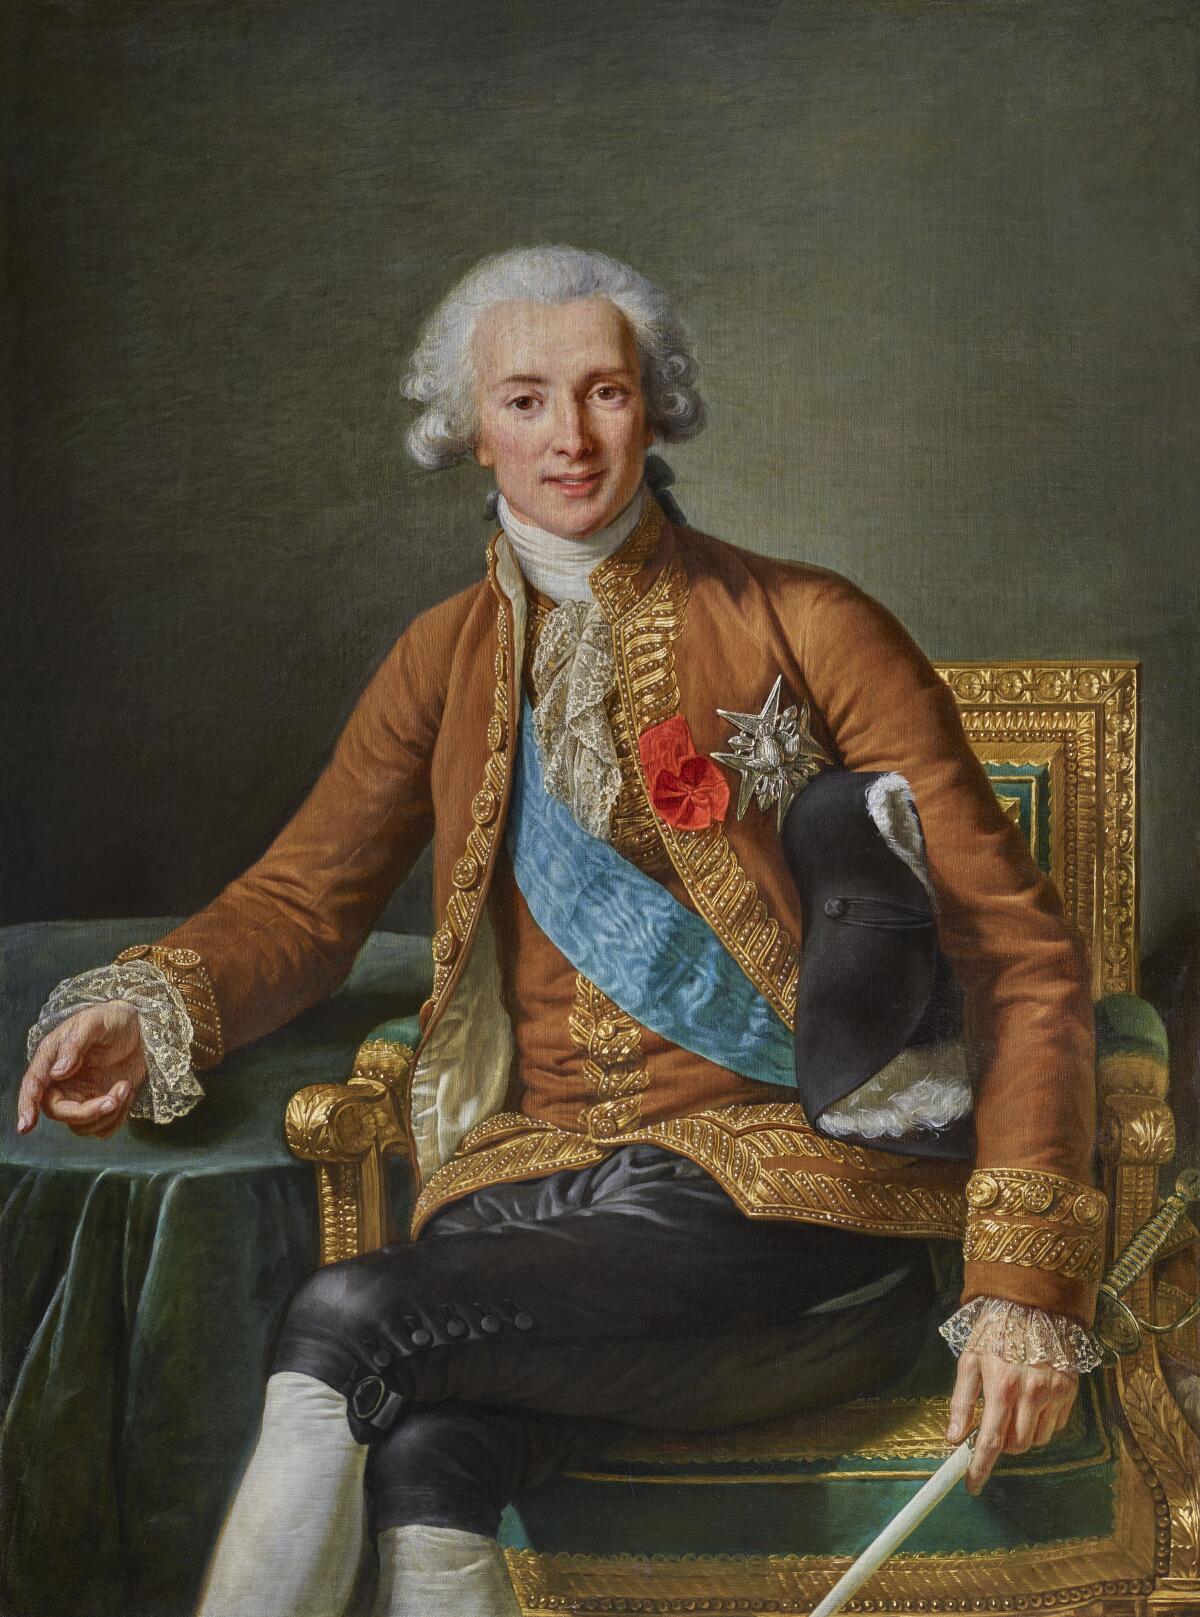 An oil portrait of a gray haired man in 18th century clothing.